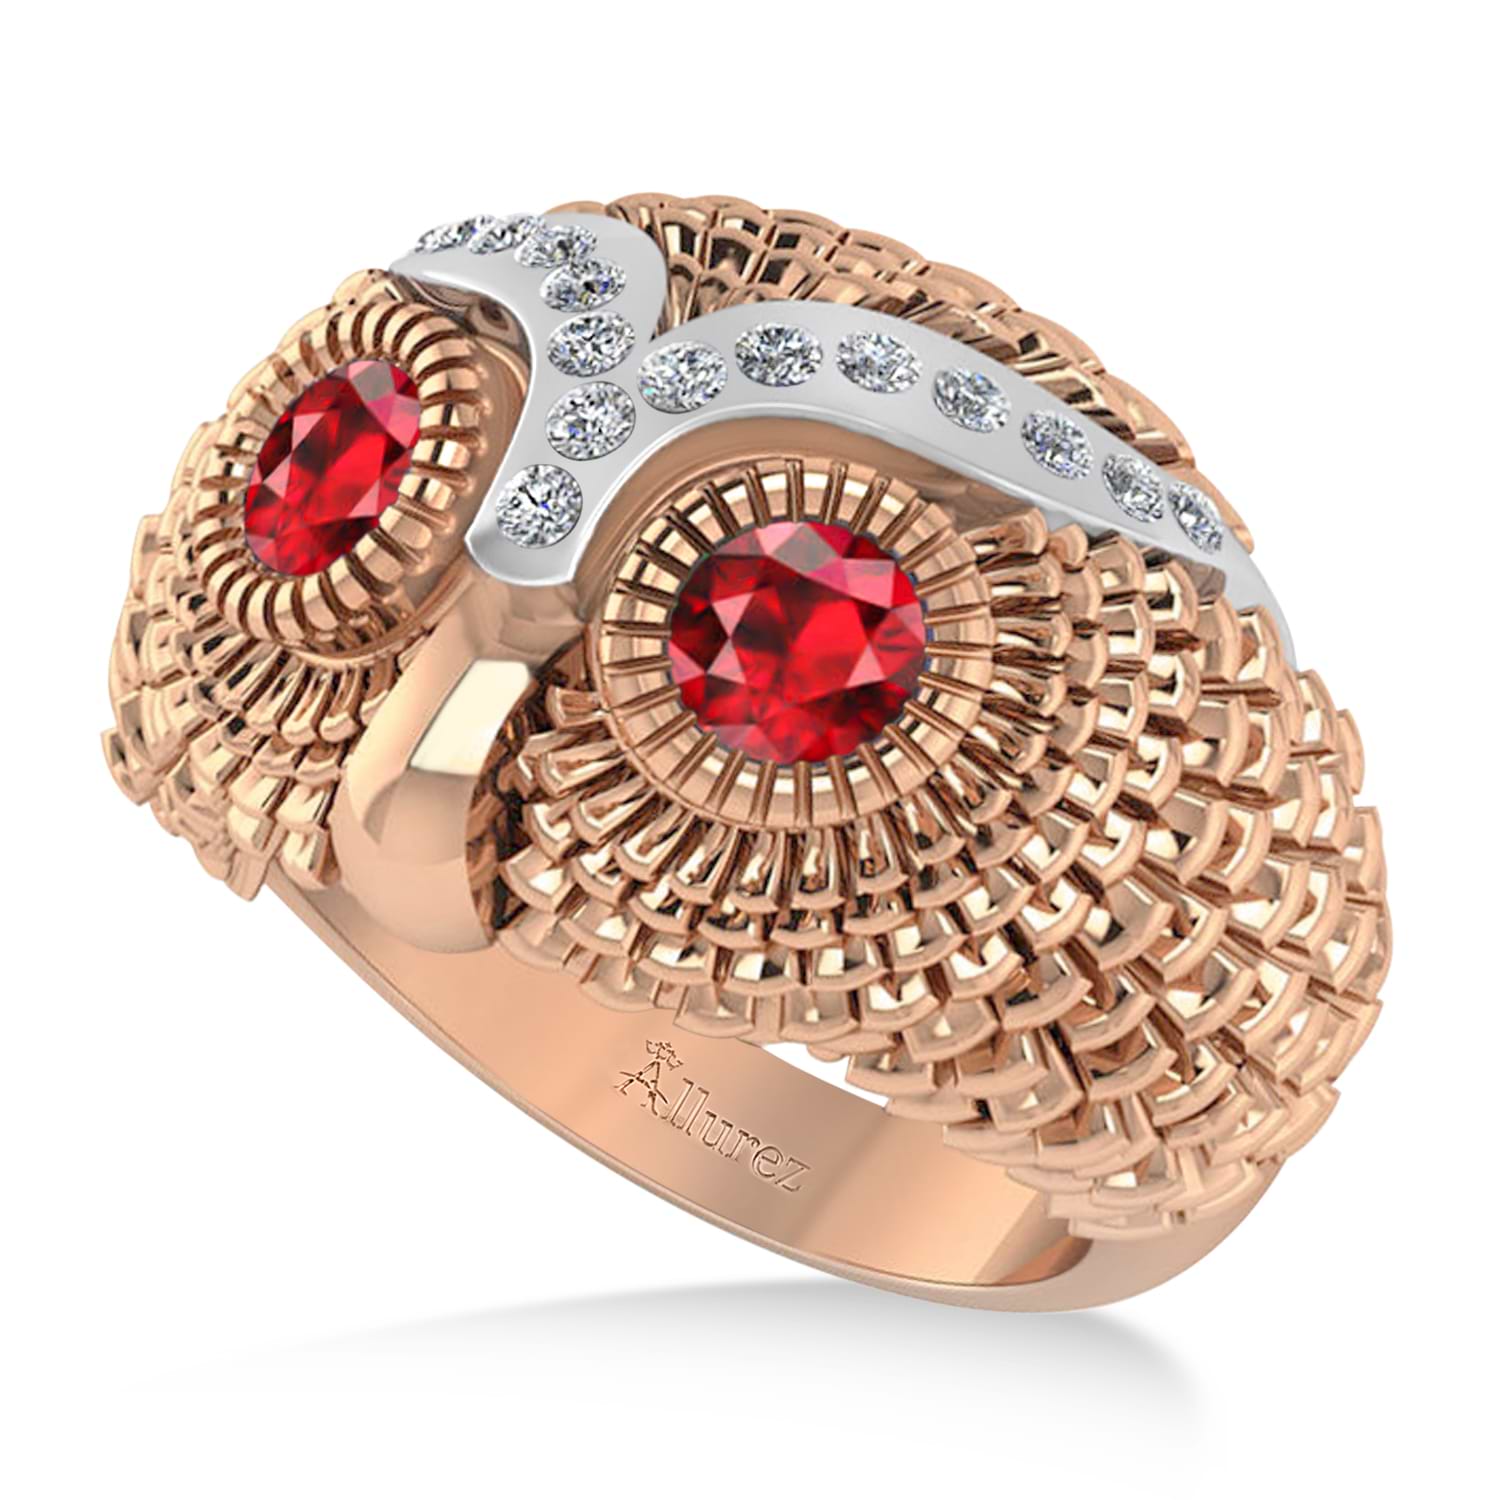 Men's Owl Diamond & Ruby Accented Fashion Ring 14k Rose Gold (0.74ct)